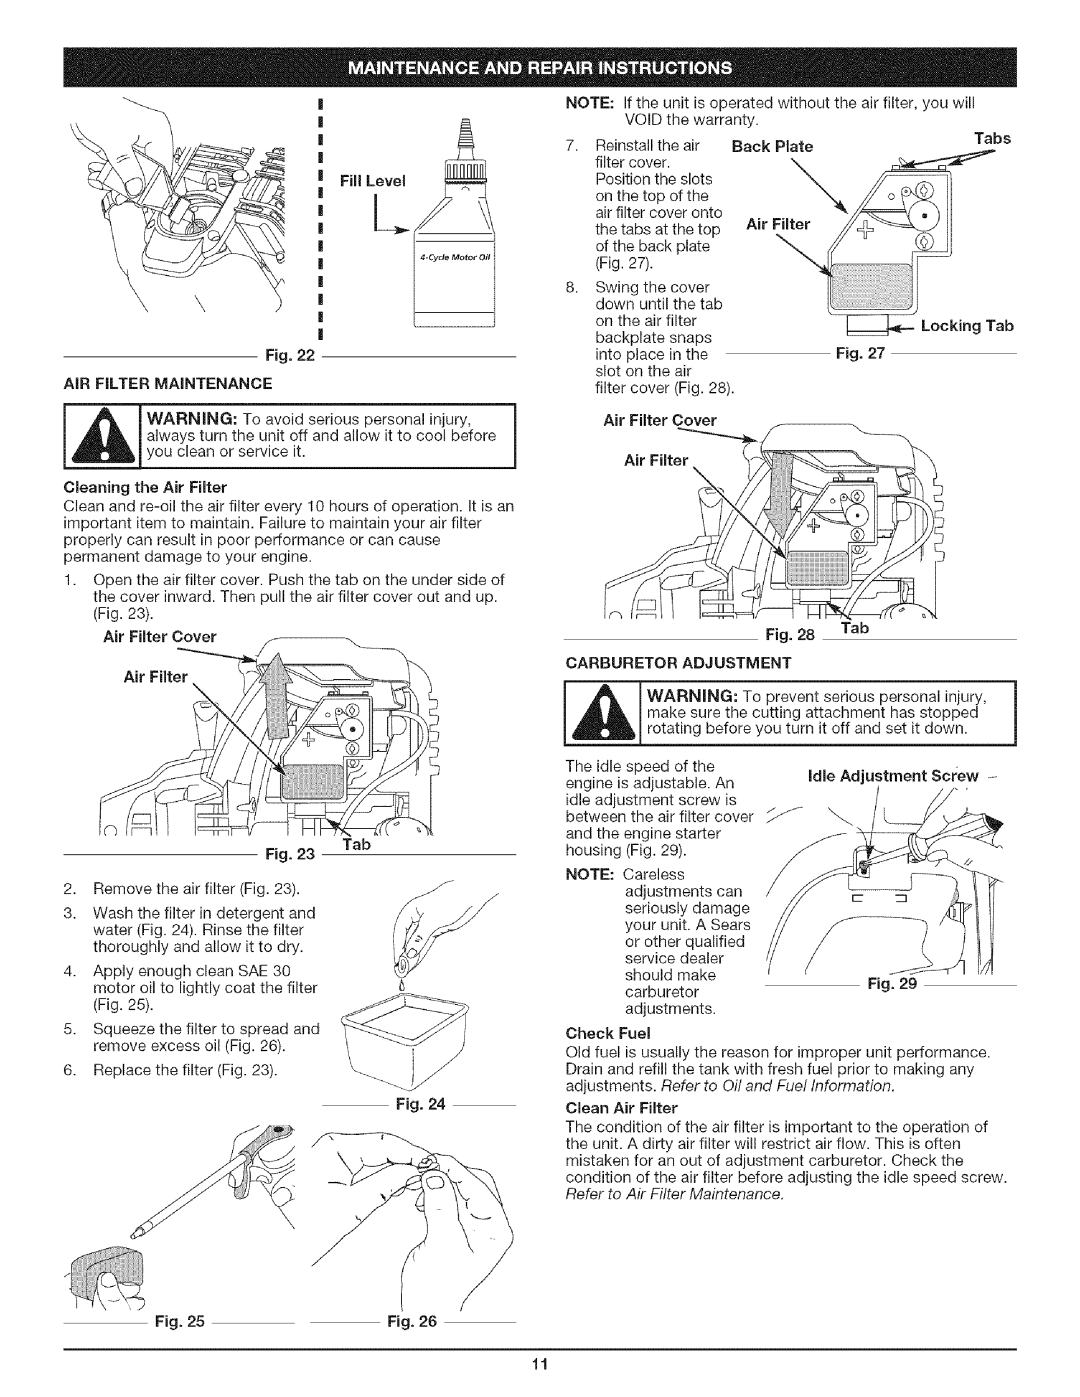 Craftsman 316.79194 manual Locking Tab, Cover, adjustments. Refer to Oil and Fuel Information 